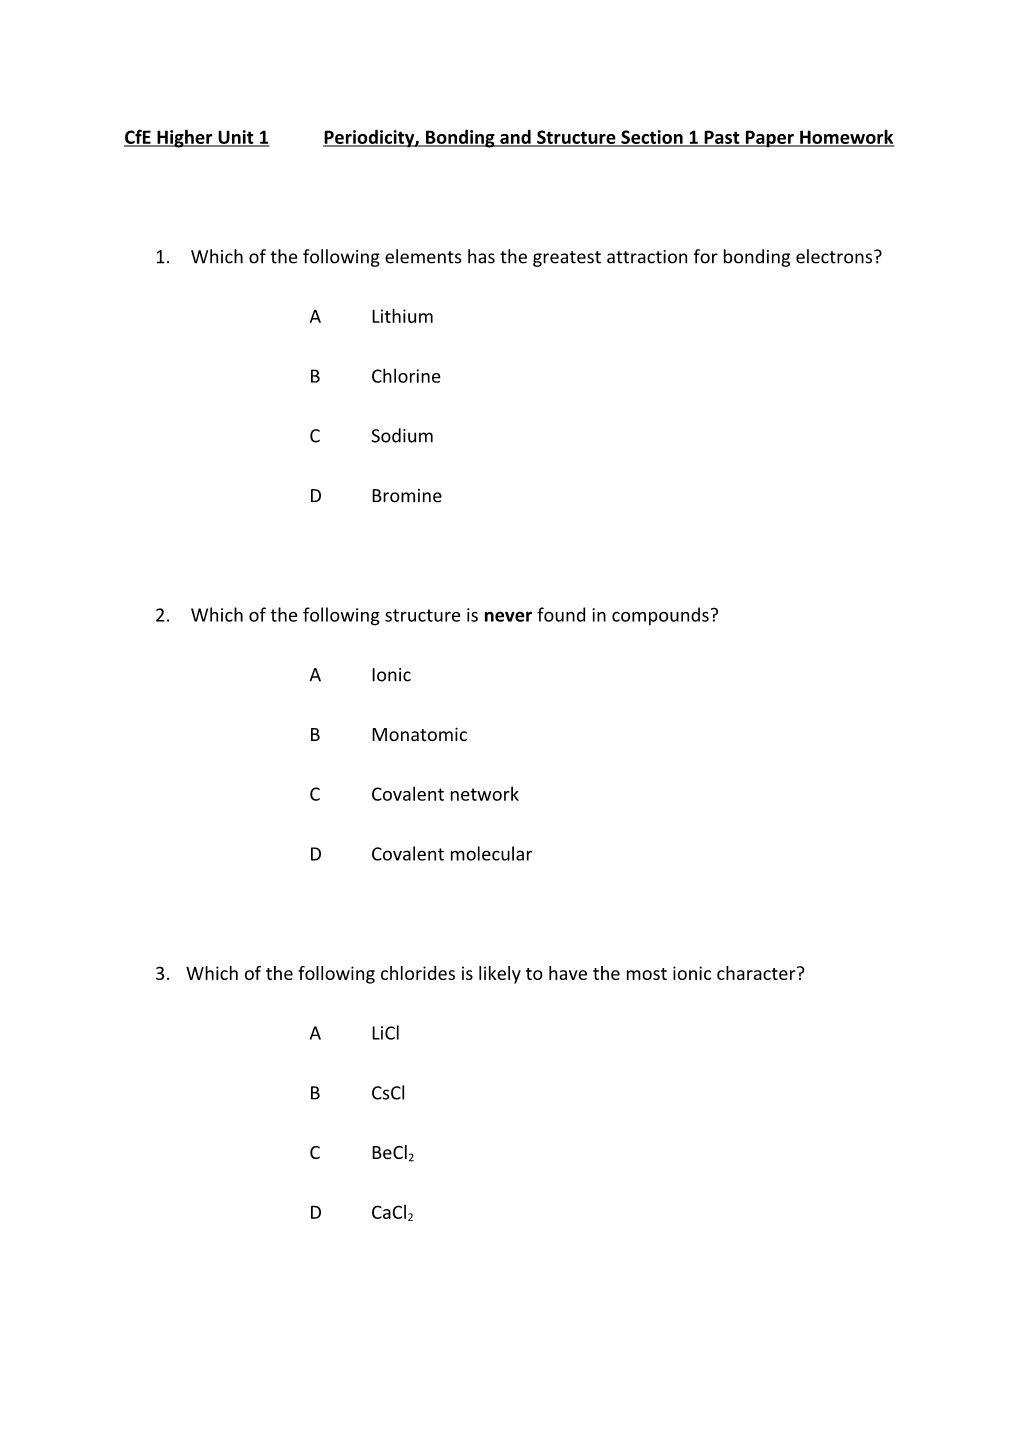 Cfe Higher Unit 1 Periodicity, Bonding and Structure Section 1 Past Paper Homework